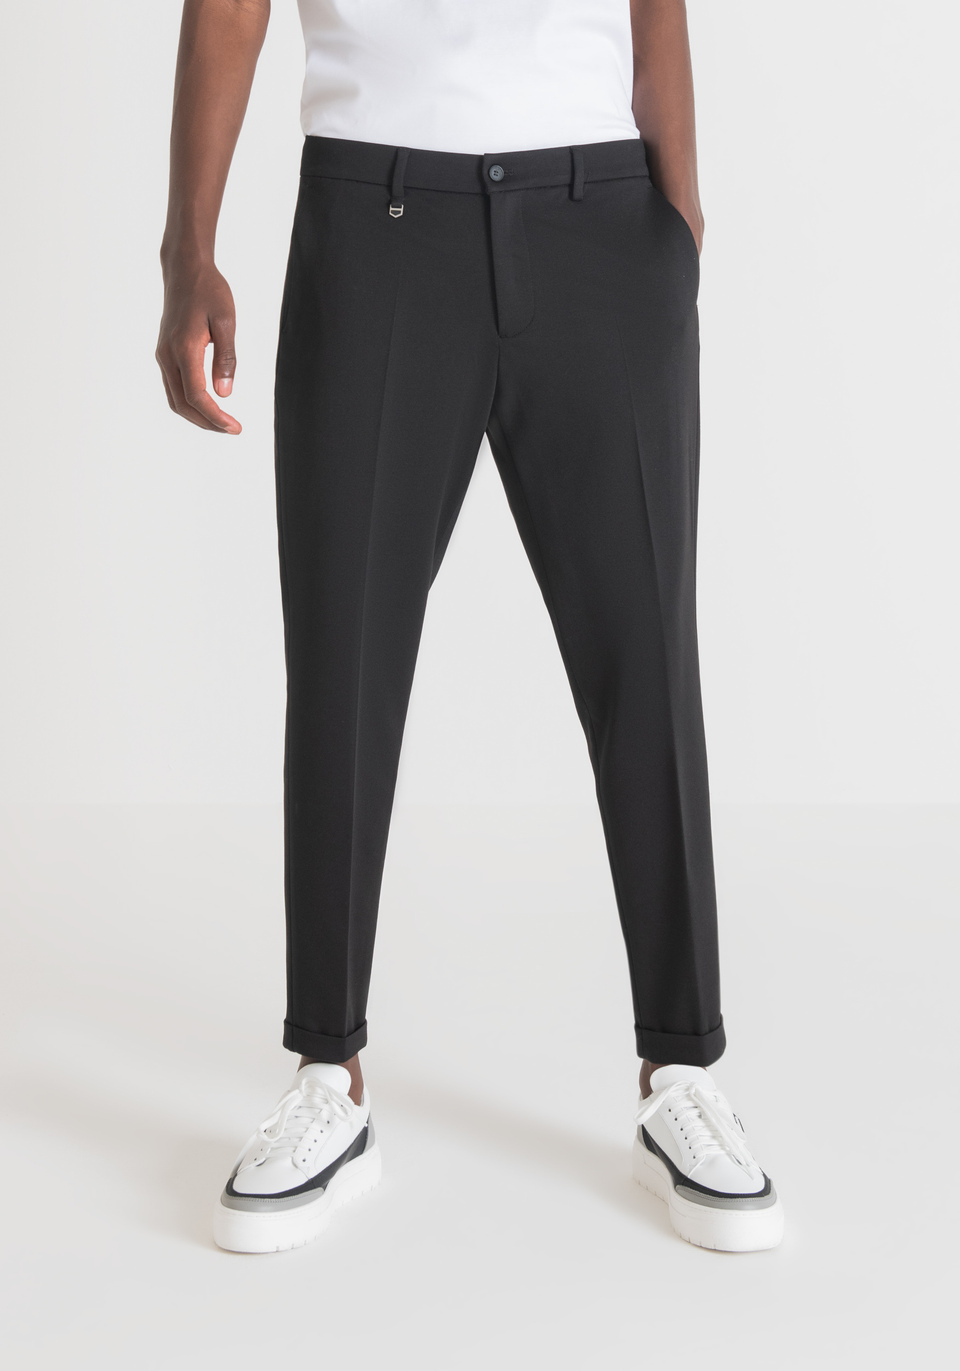 “ASHE” SUPER SKINNY FIT TROUSERS WITH CENTRAL CREASE - Antony Morato Online Shop